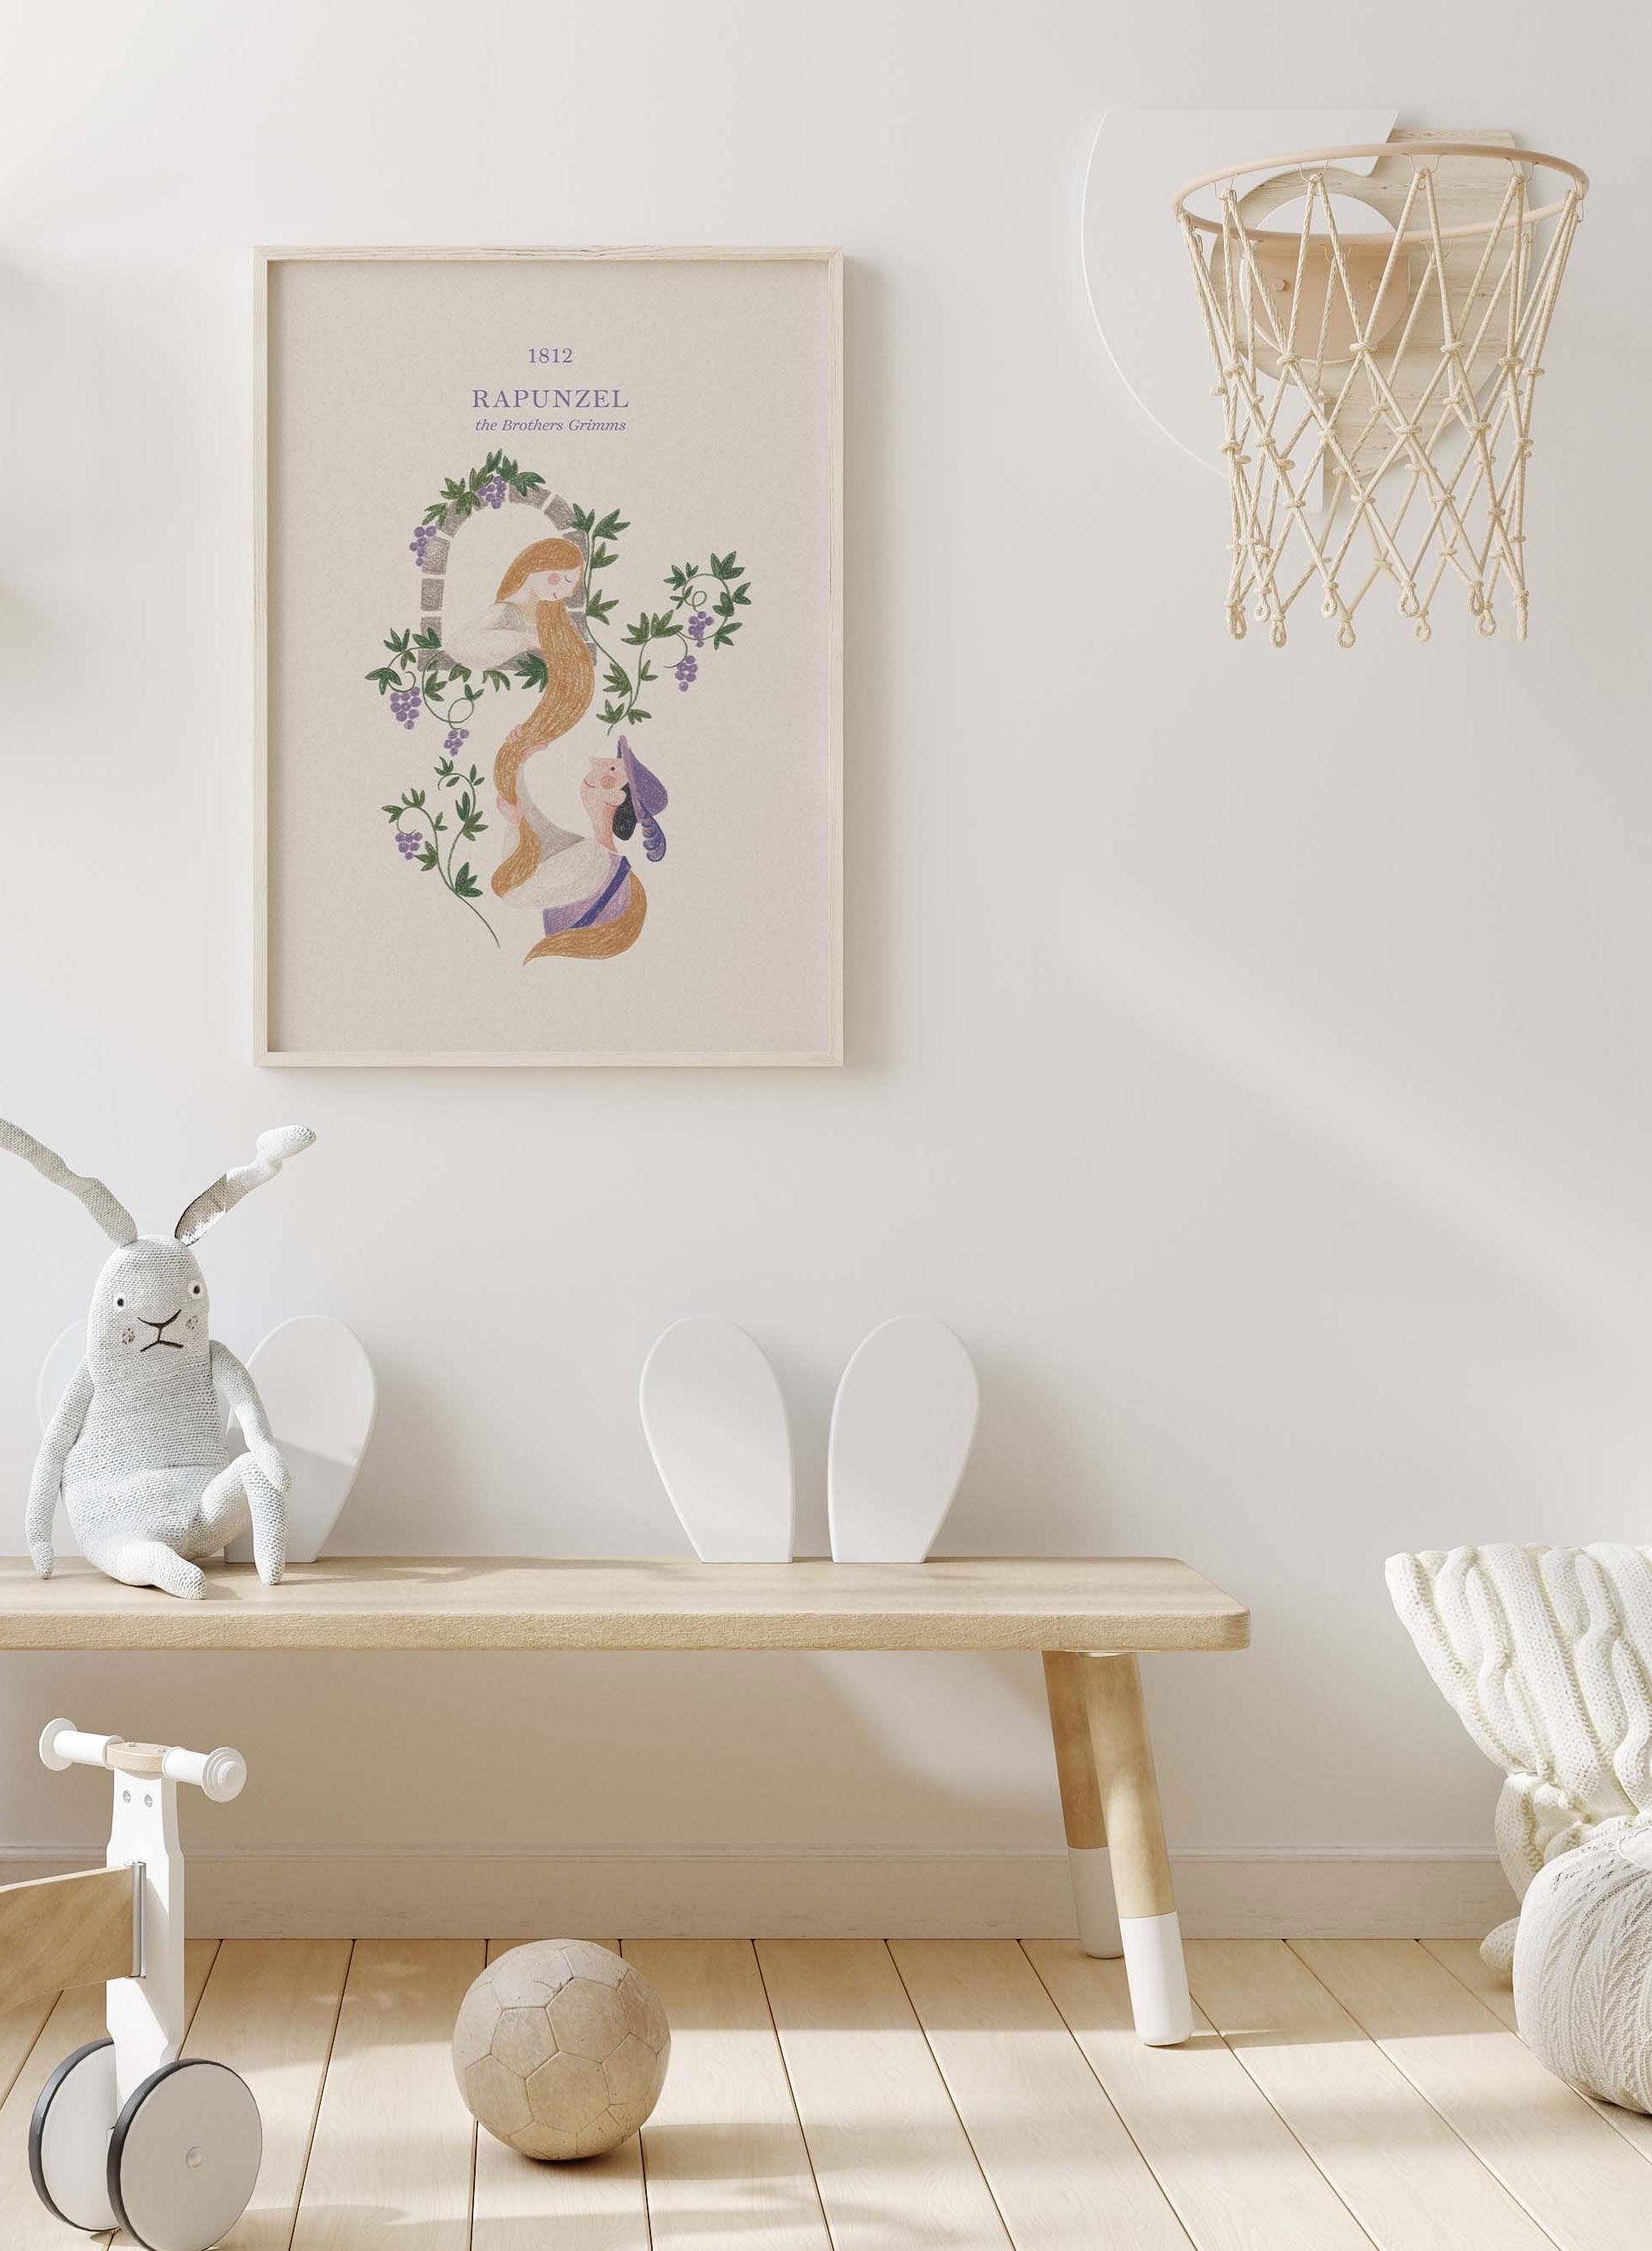 Rapunzel is a minimalist illustration by Opposite Wall of the Brothers Grimm's Rapunzel where the prince is grabbing her hair to save her from the tower.